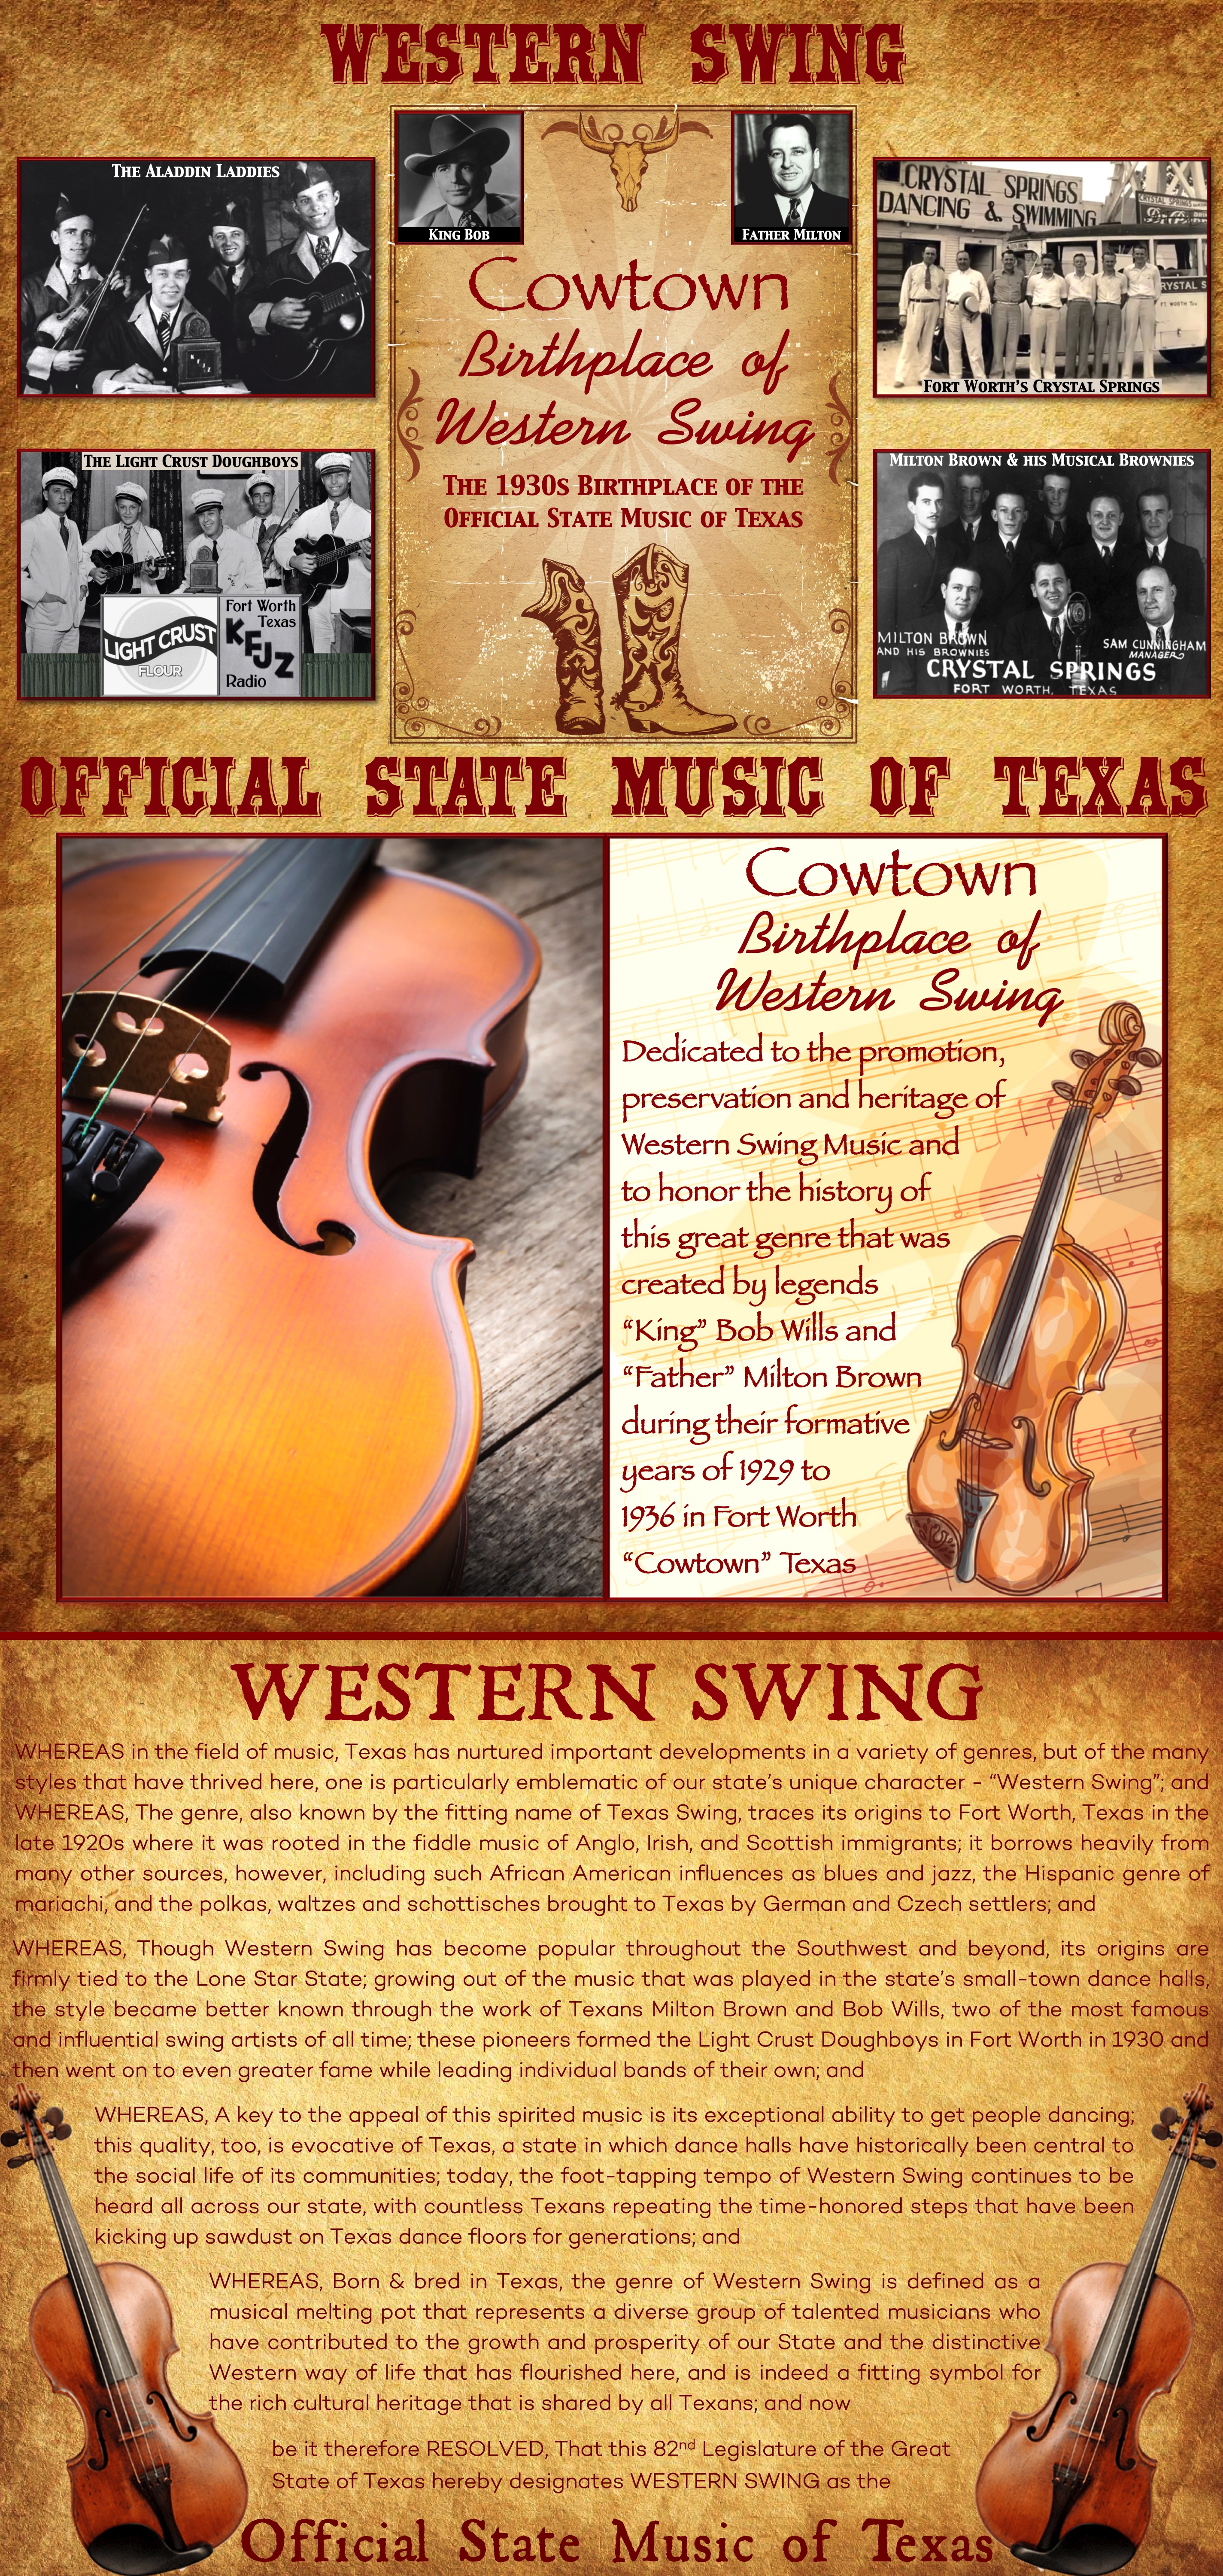 Cowtown Birthplace of Western Swing